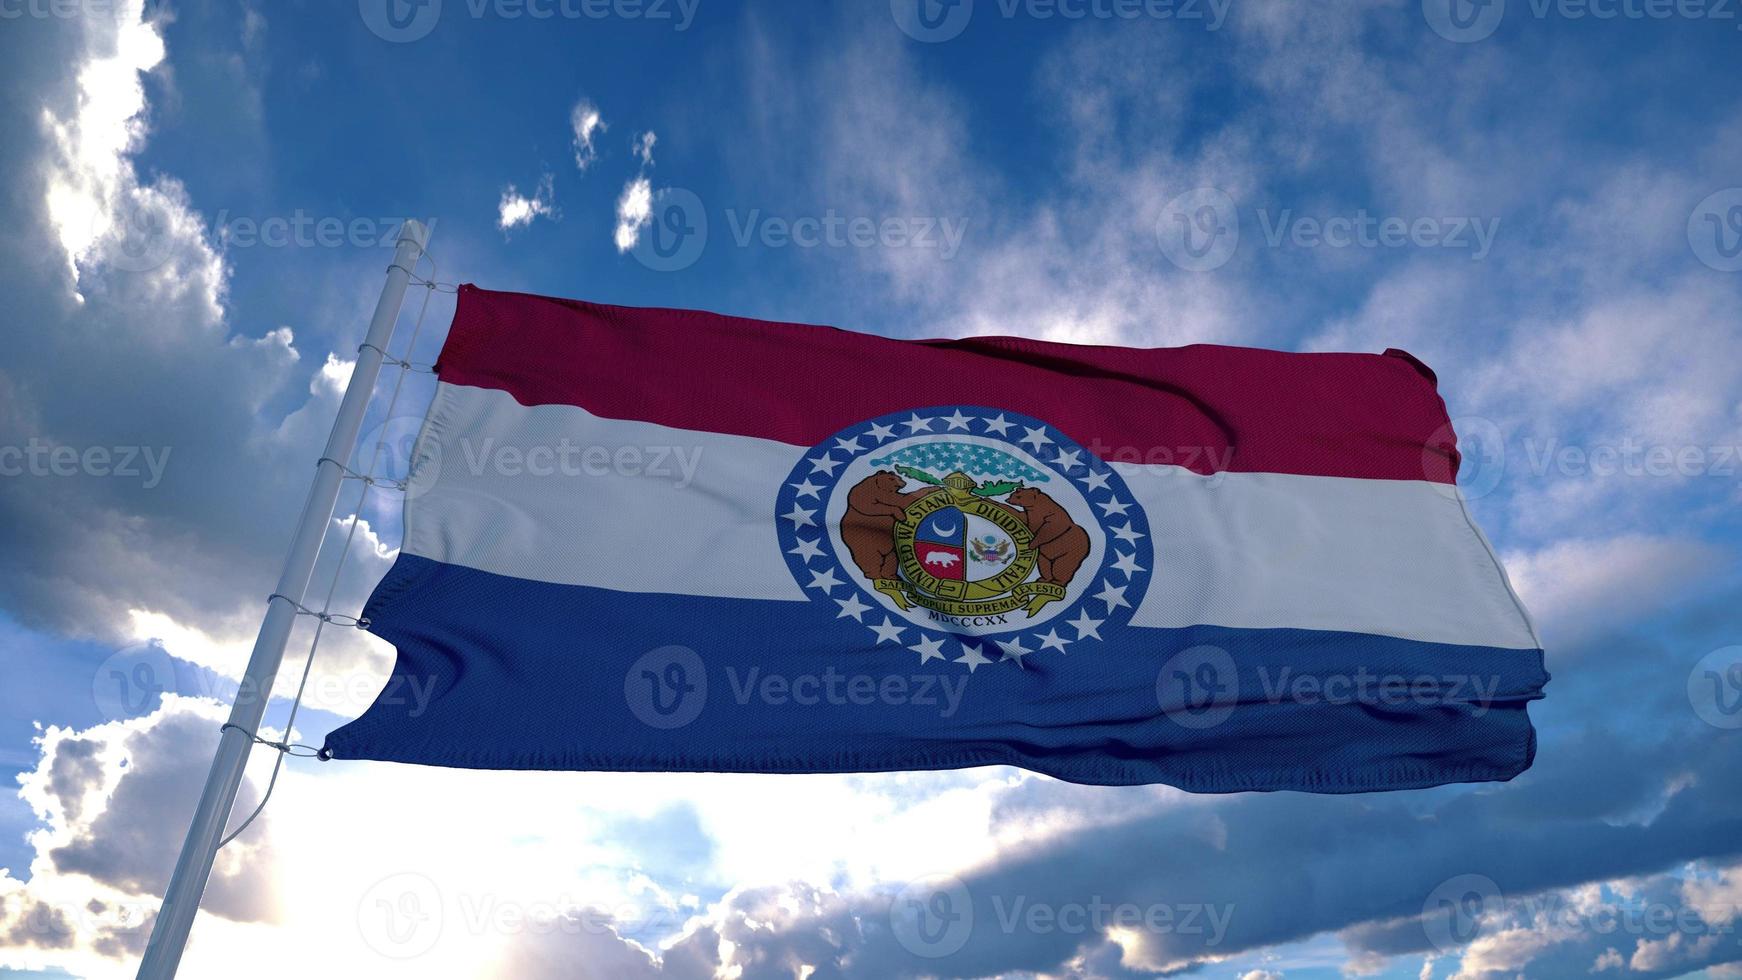 Missouri flag on a flagpole waving in the wind, blue sky background. 3d rendering photo